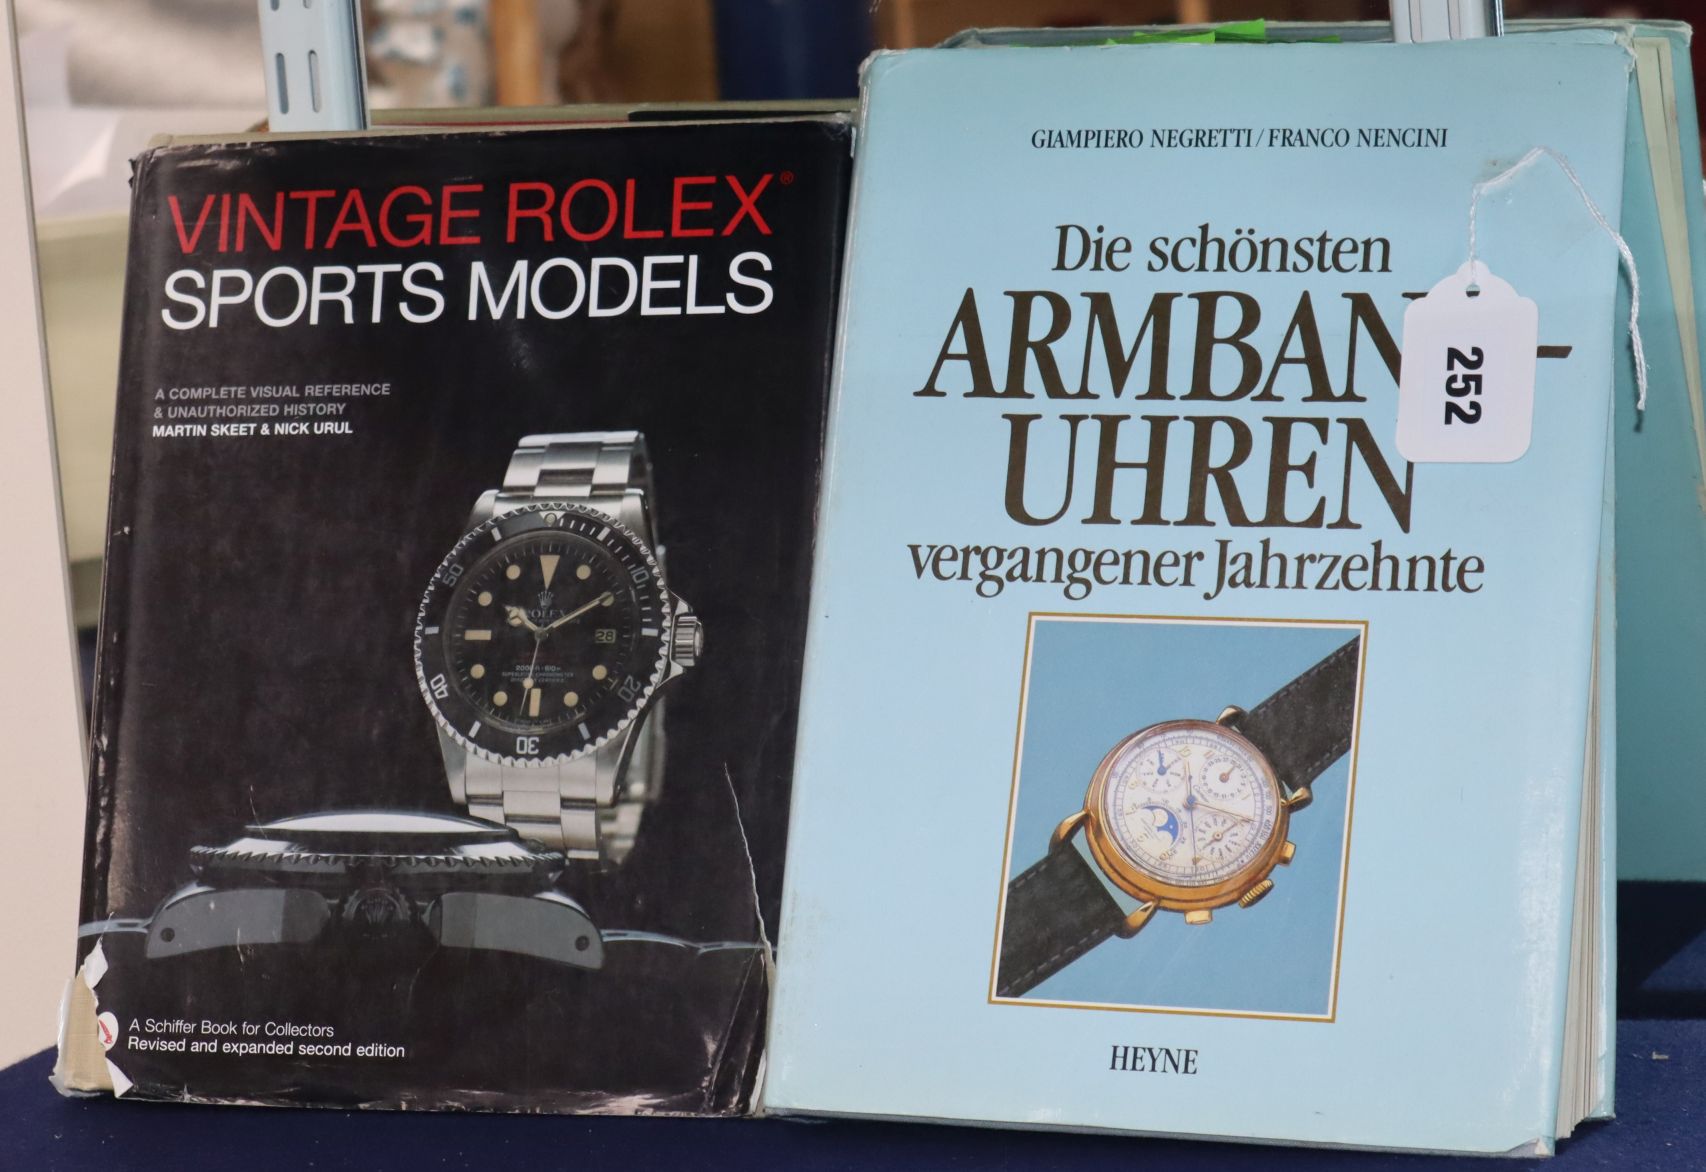 A book Vintage Rolex Watches, a similar book and a group of mostly Rolex watch boxes